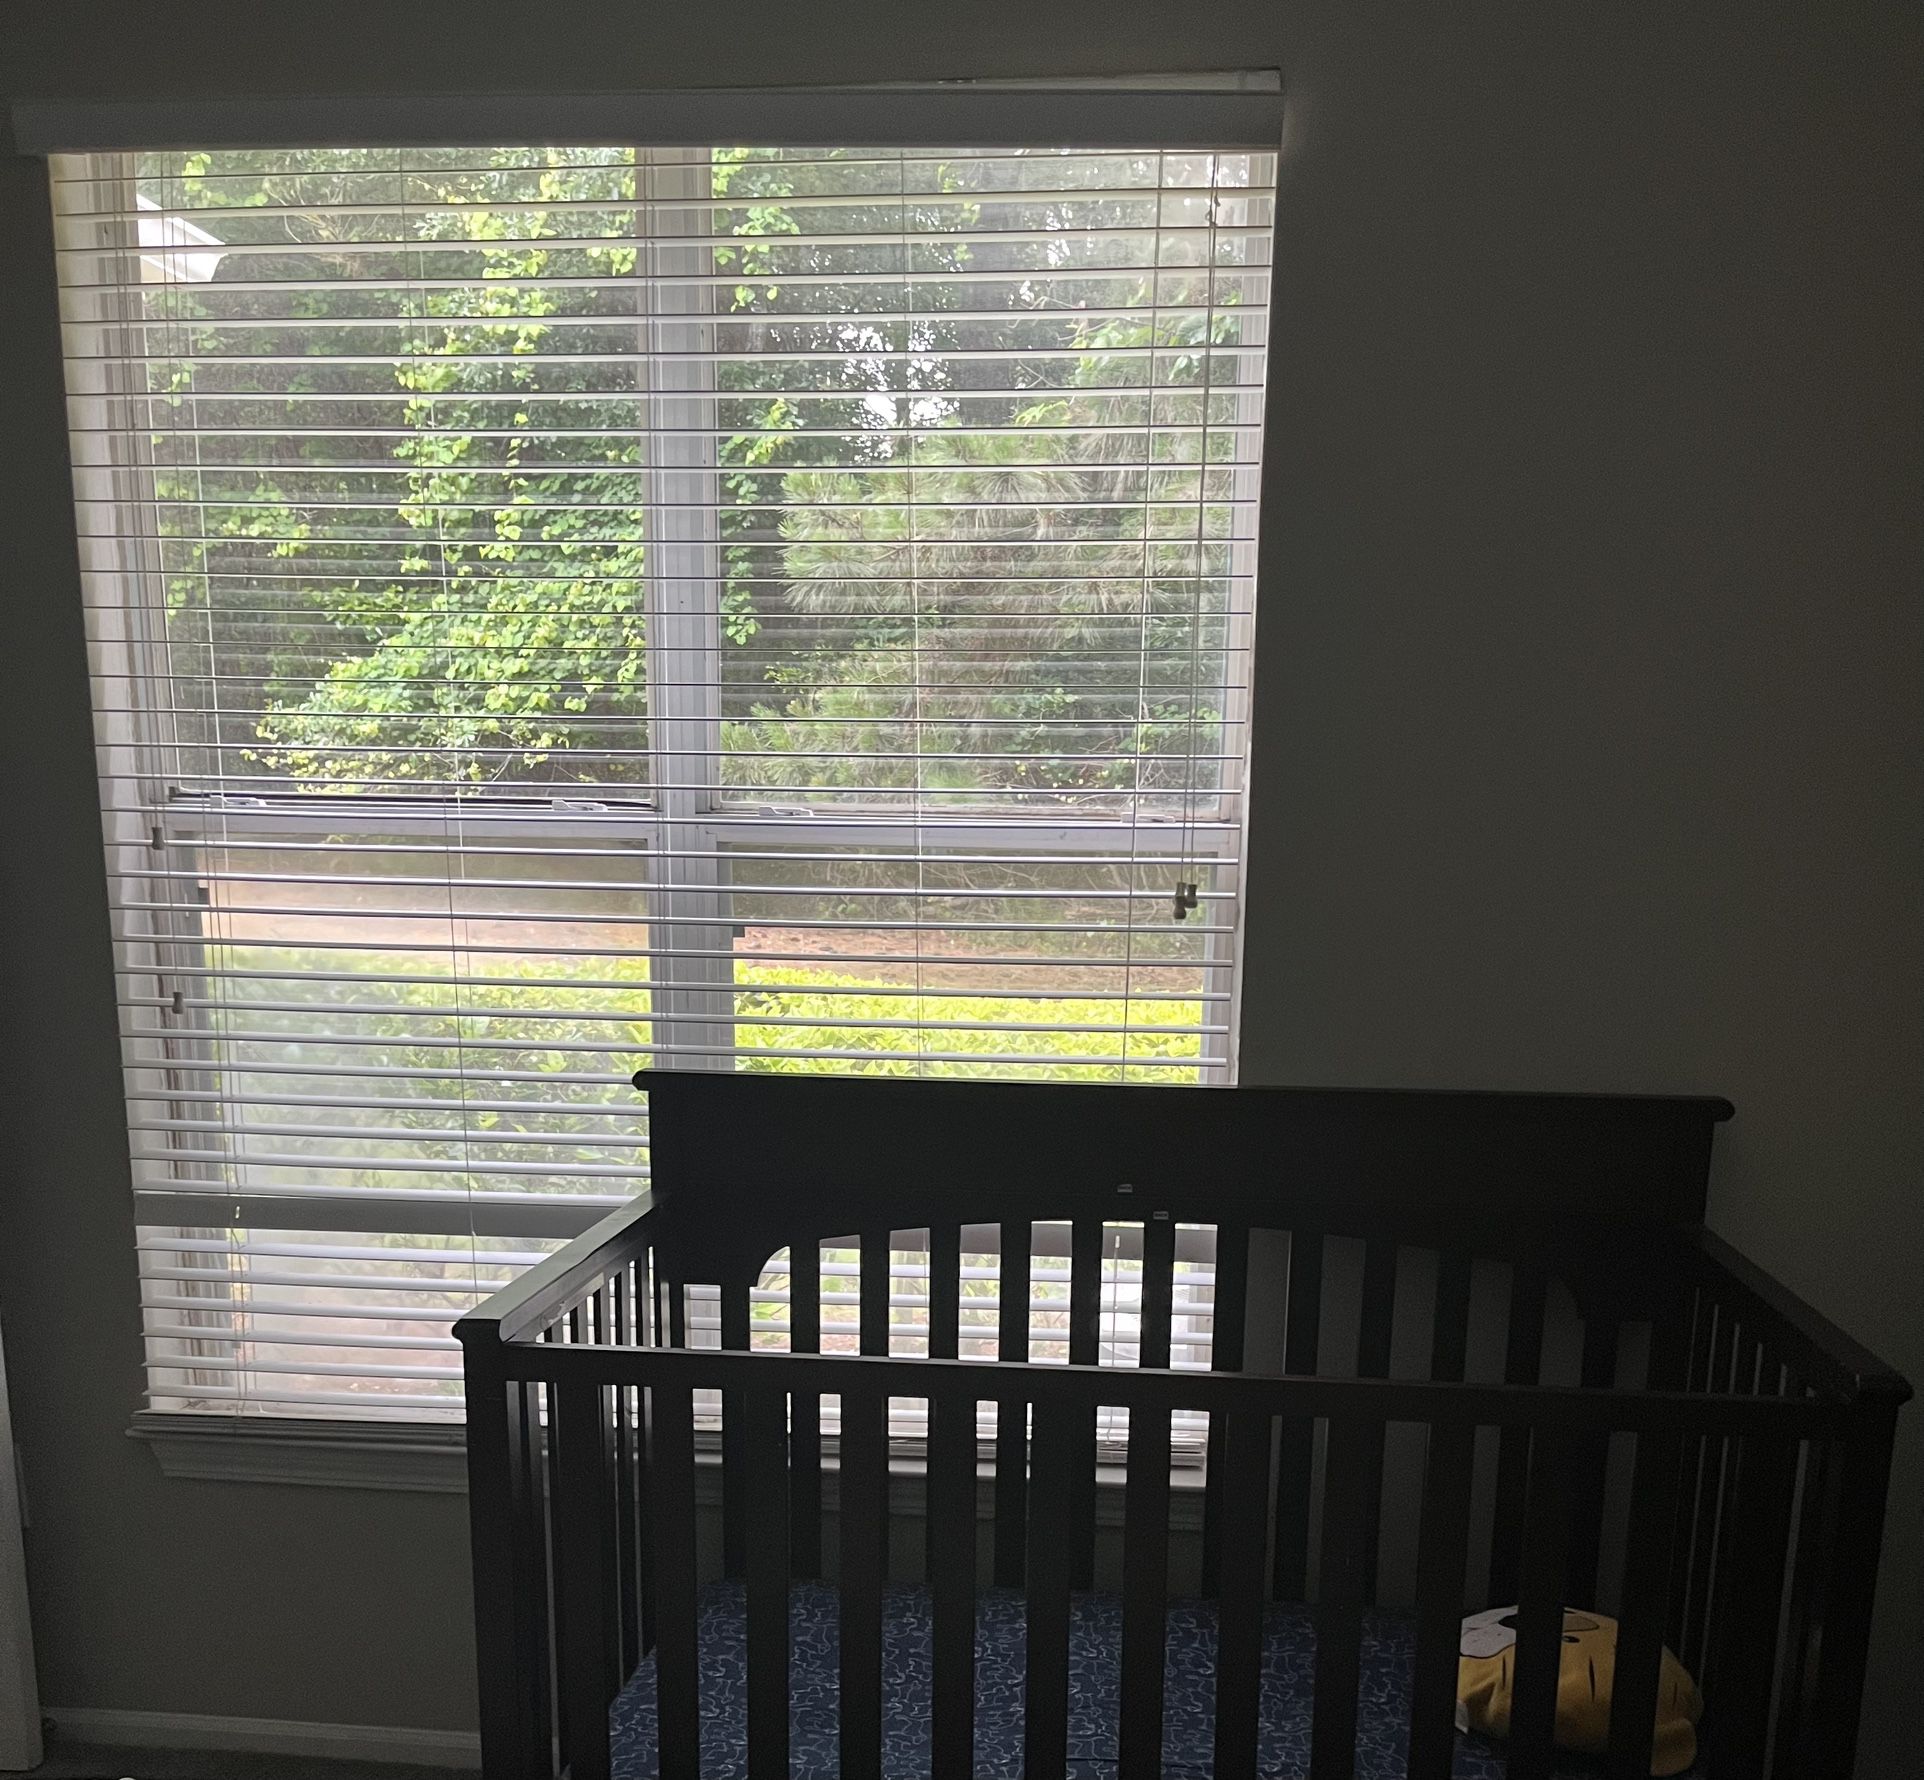 4 In 1 Crib With toddler mattress